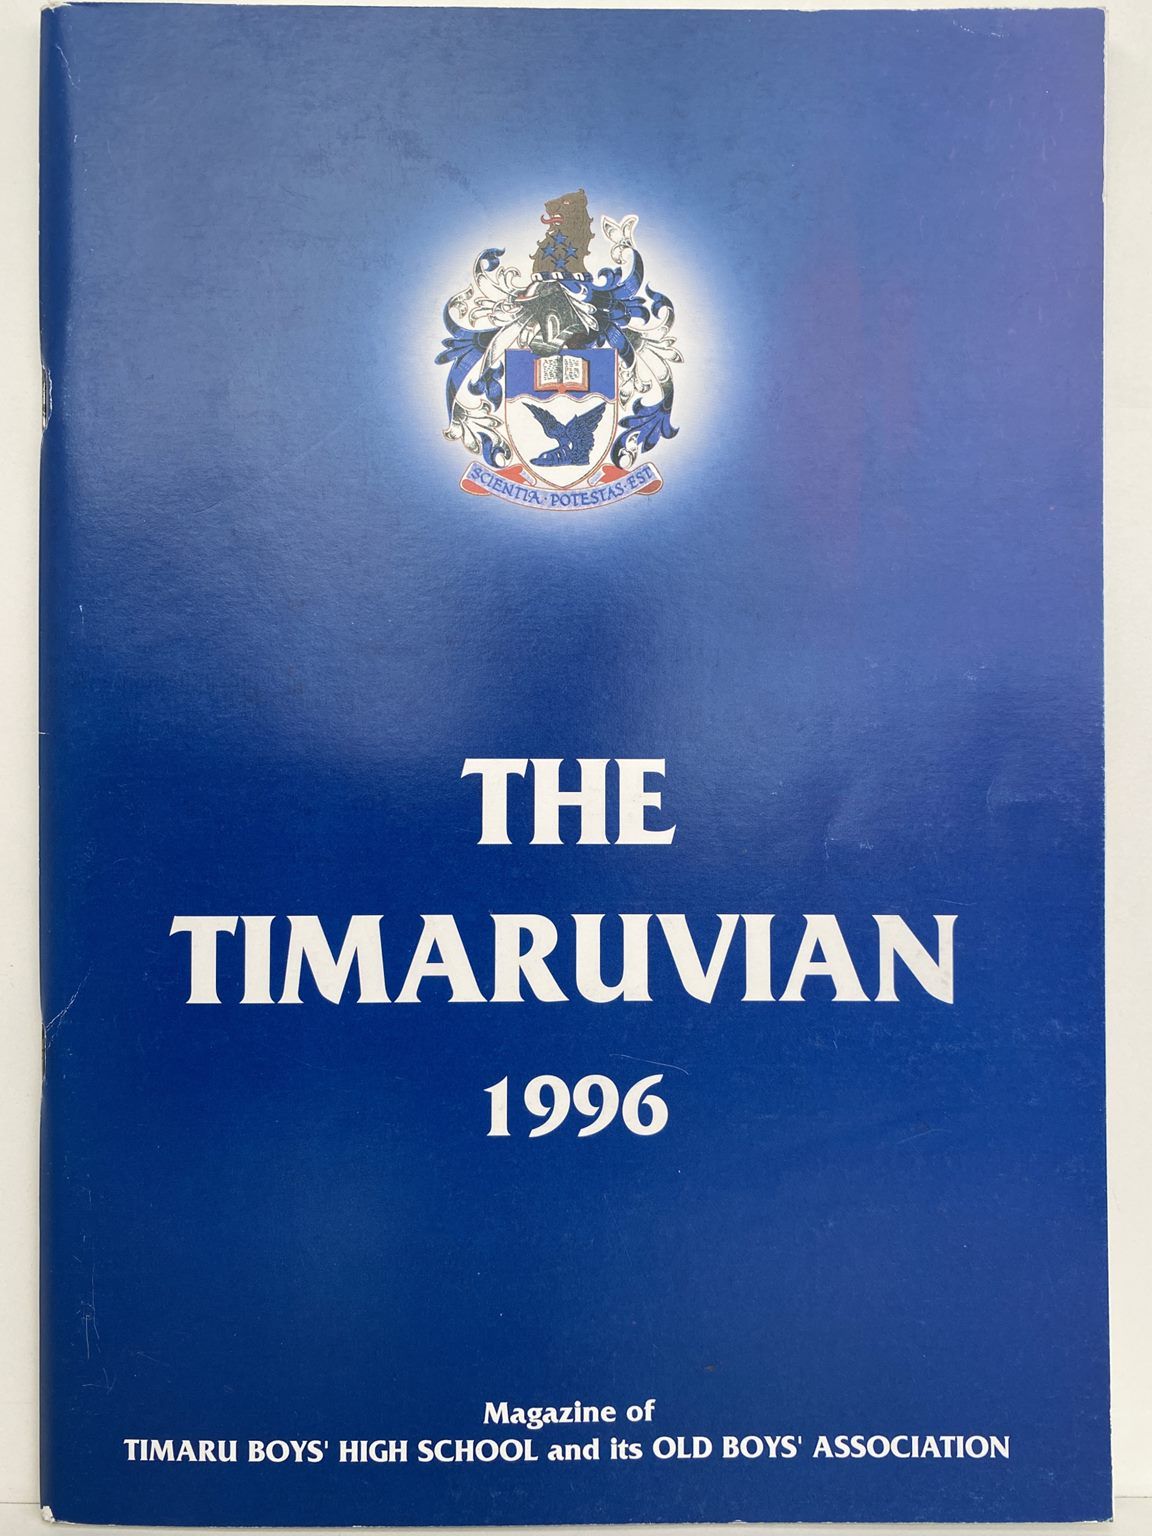 THE TIMARUVIAN: Magazine of the Timaru Boys' High School and its Old Boys' Association 1996